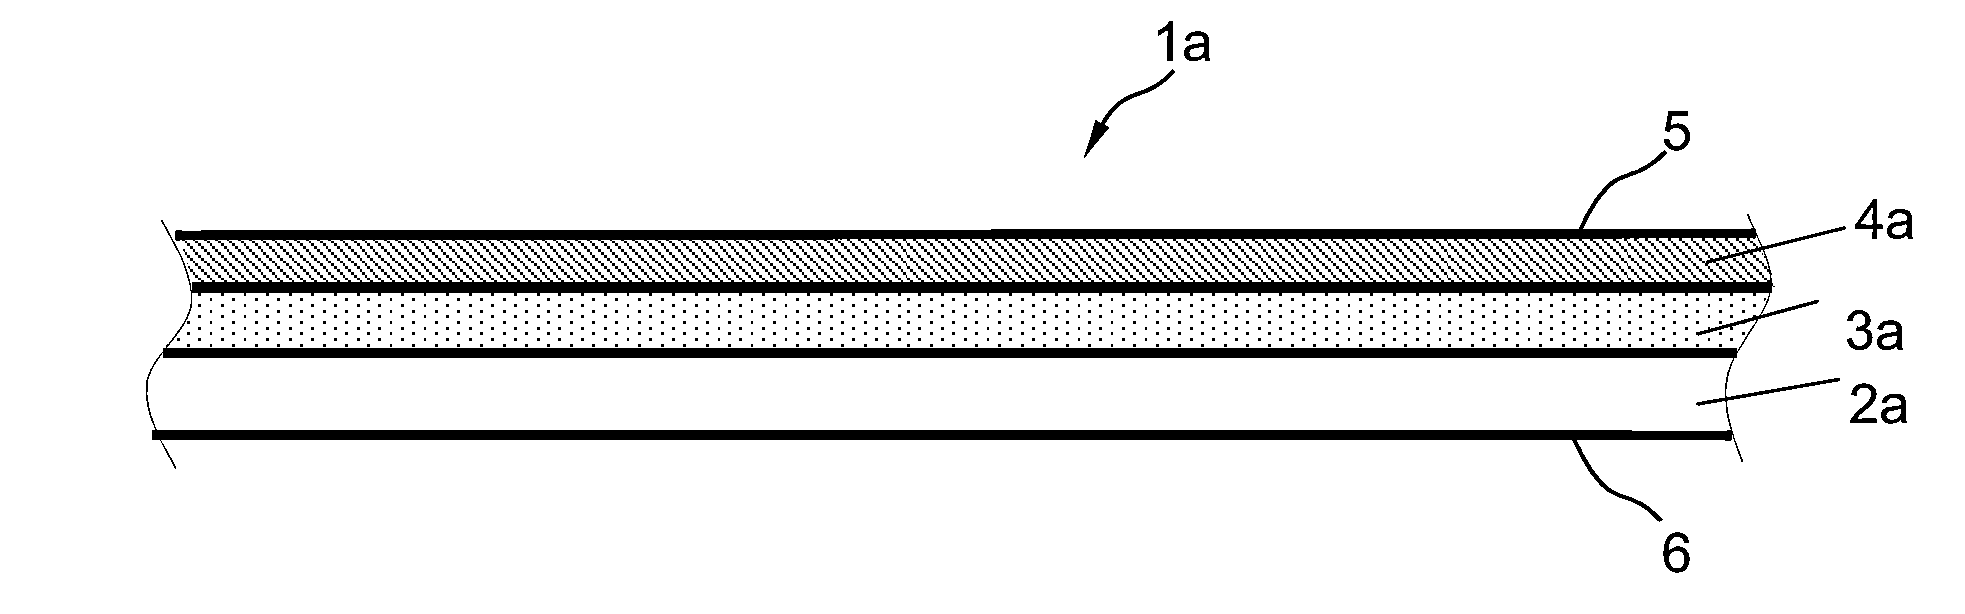 Separation membrane for water treatment and production method for same